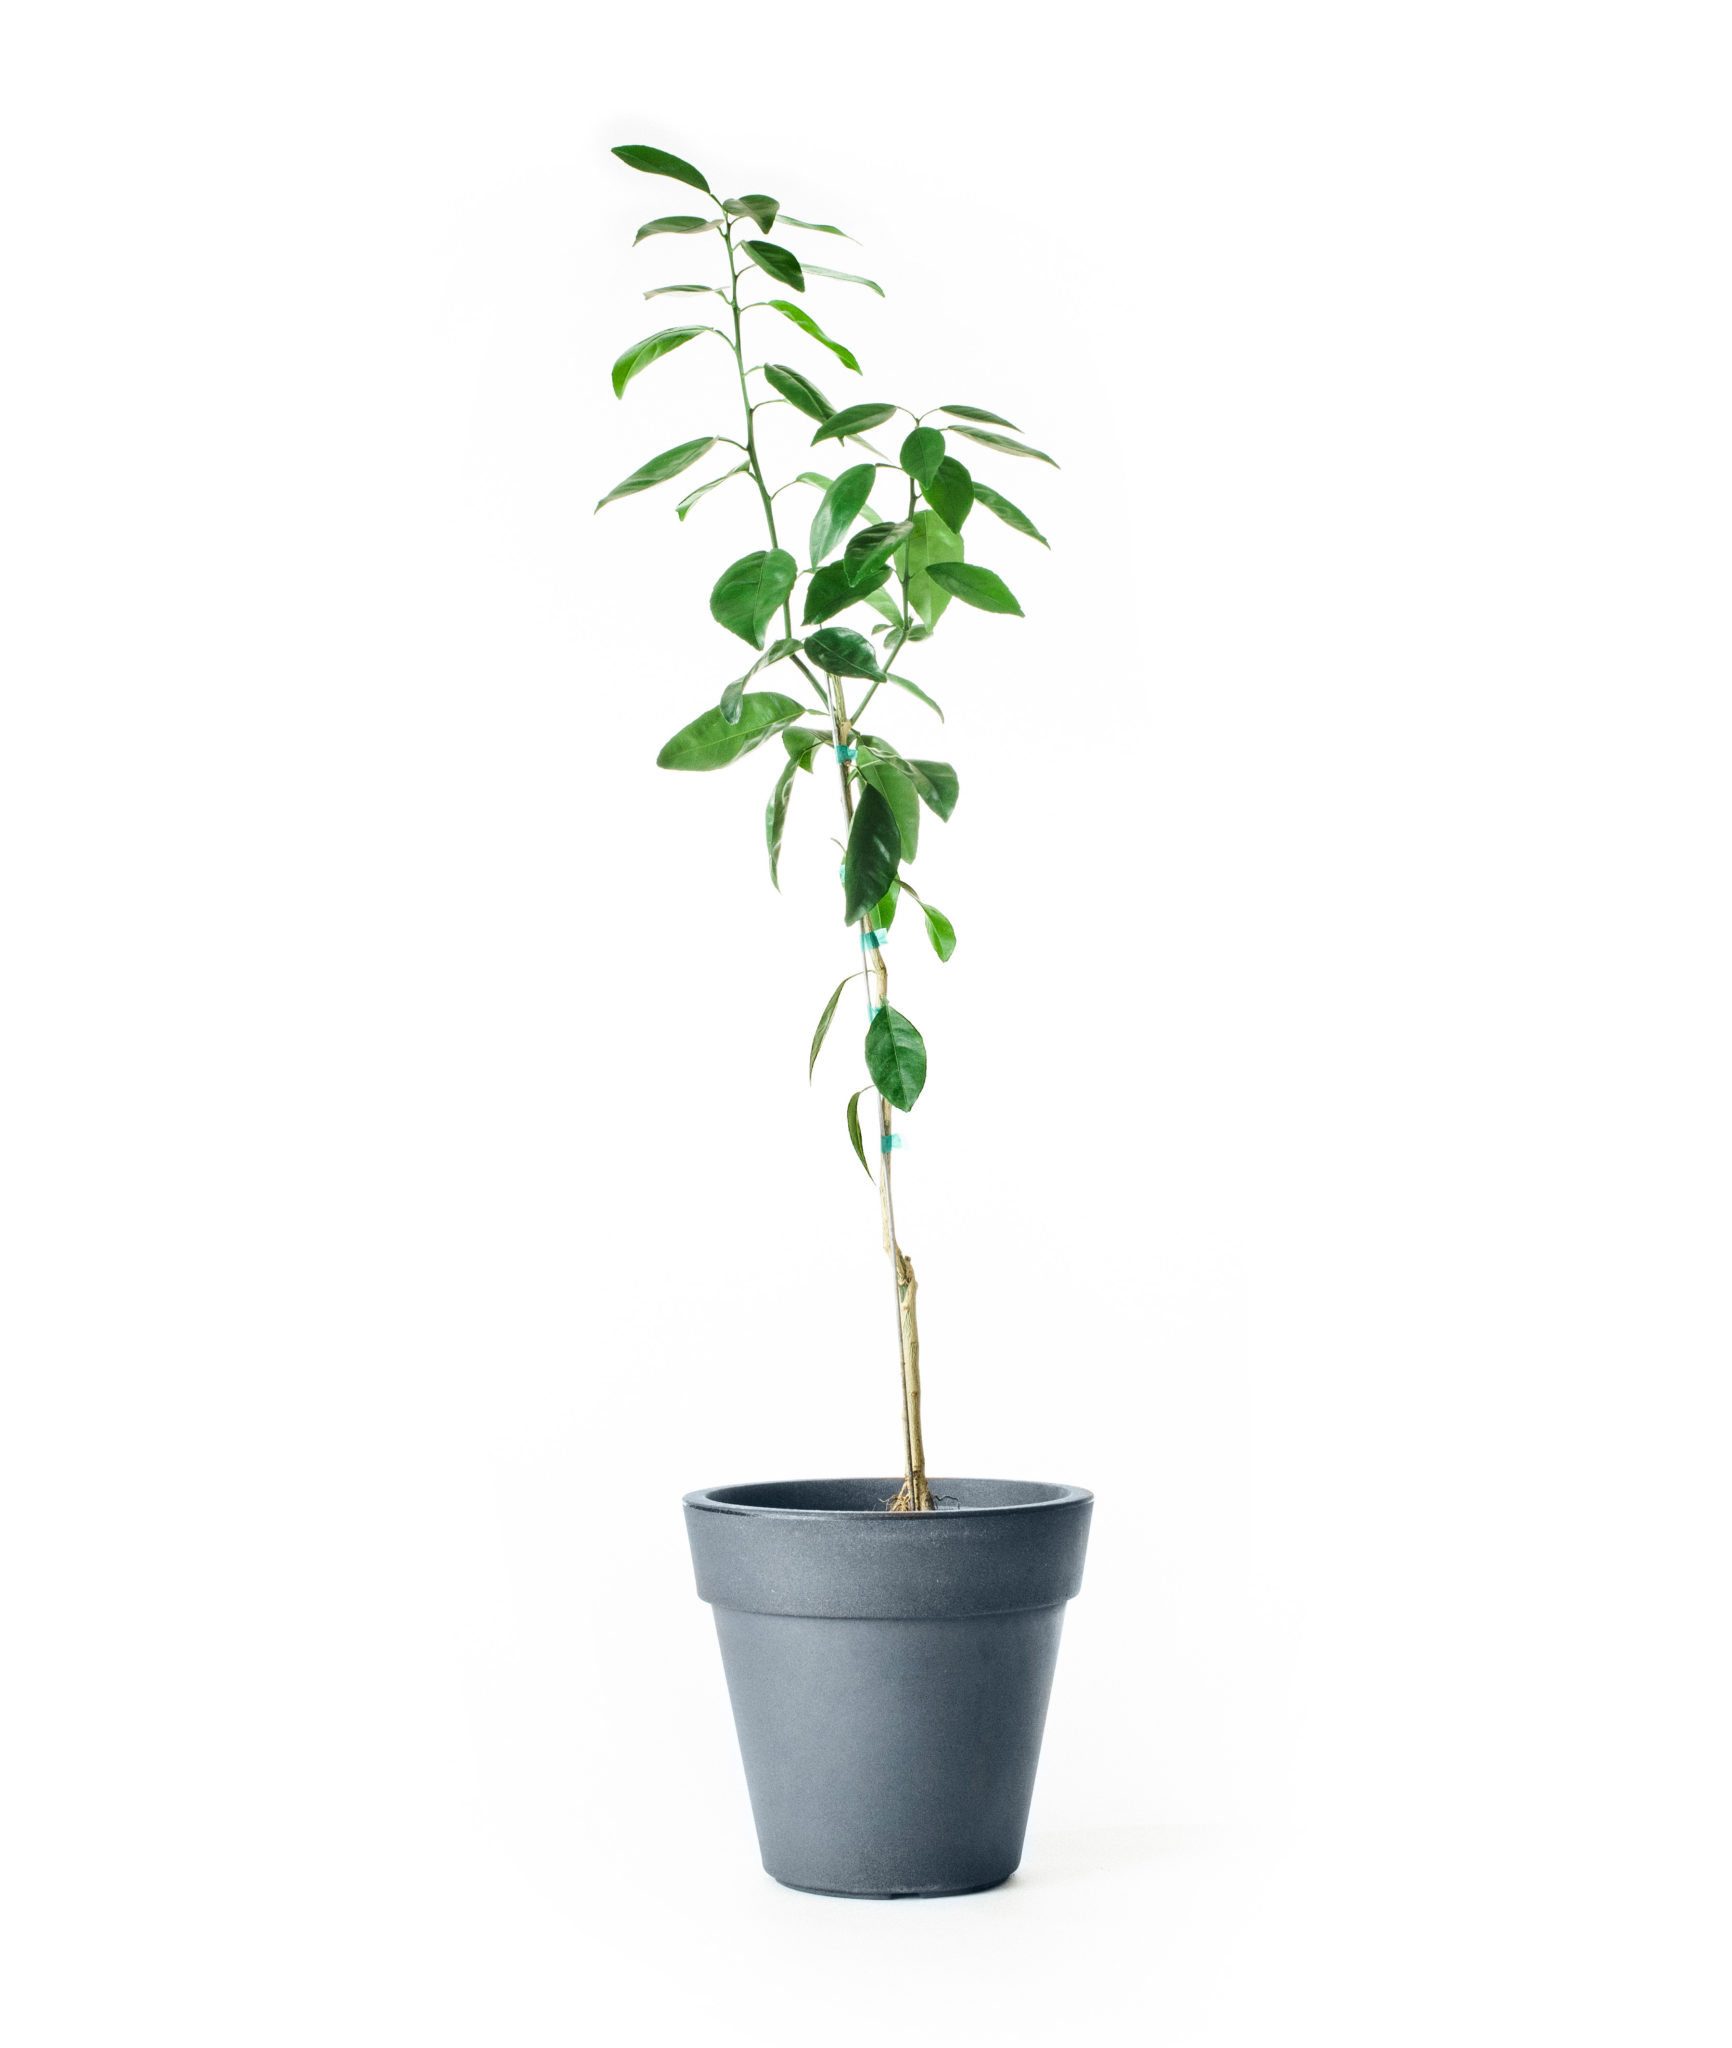 Image of Ponkan Mandarin Tree (Age: 2 - 3 Years Height: 2 - 3 FT Ship Method: Delivery)